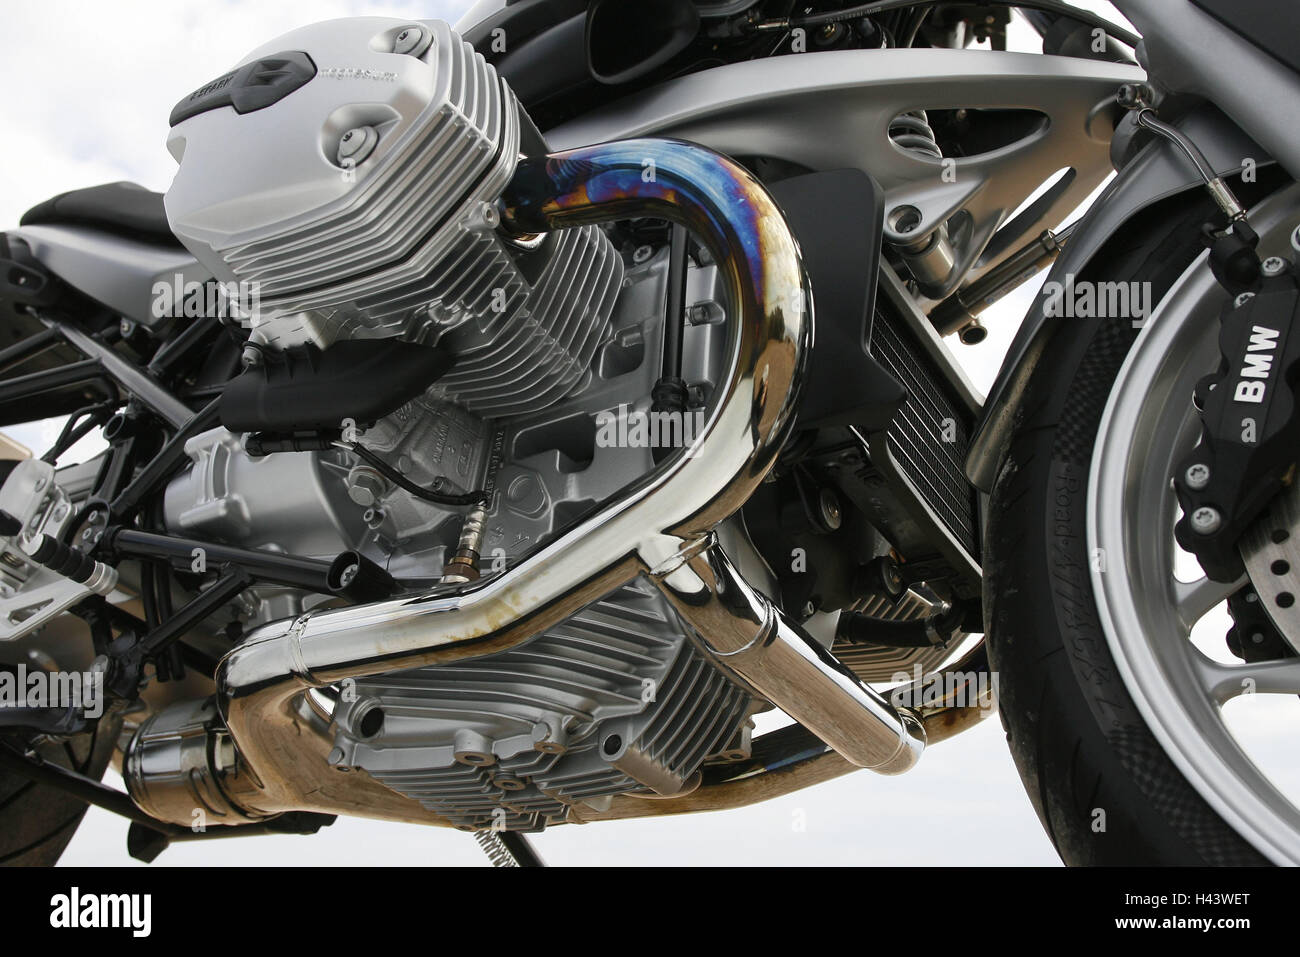 Two-cylinders VT, BMW R 1200 R, detail, cylinder block, BMW R-1200-R, engine, motorcycle, stand, curled, nobody, outside, Stock Photo